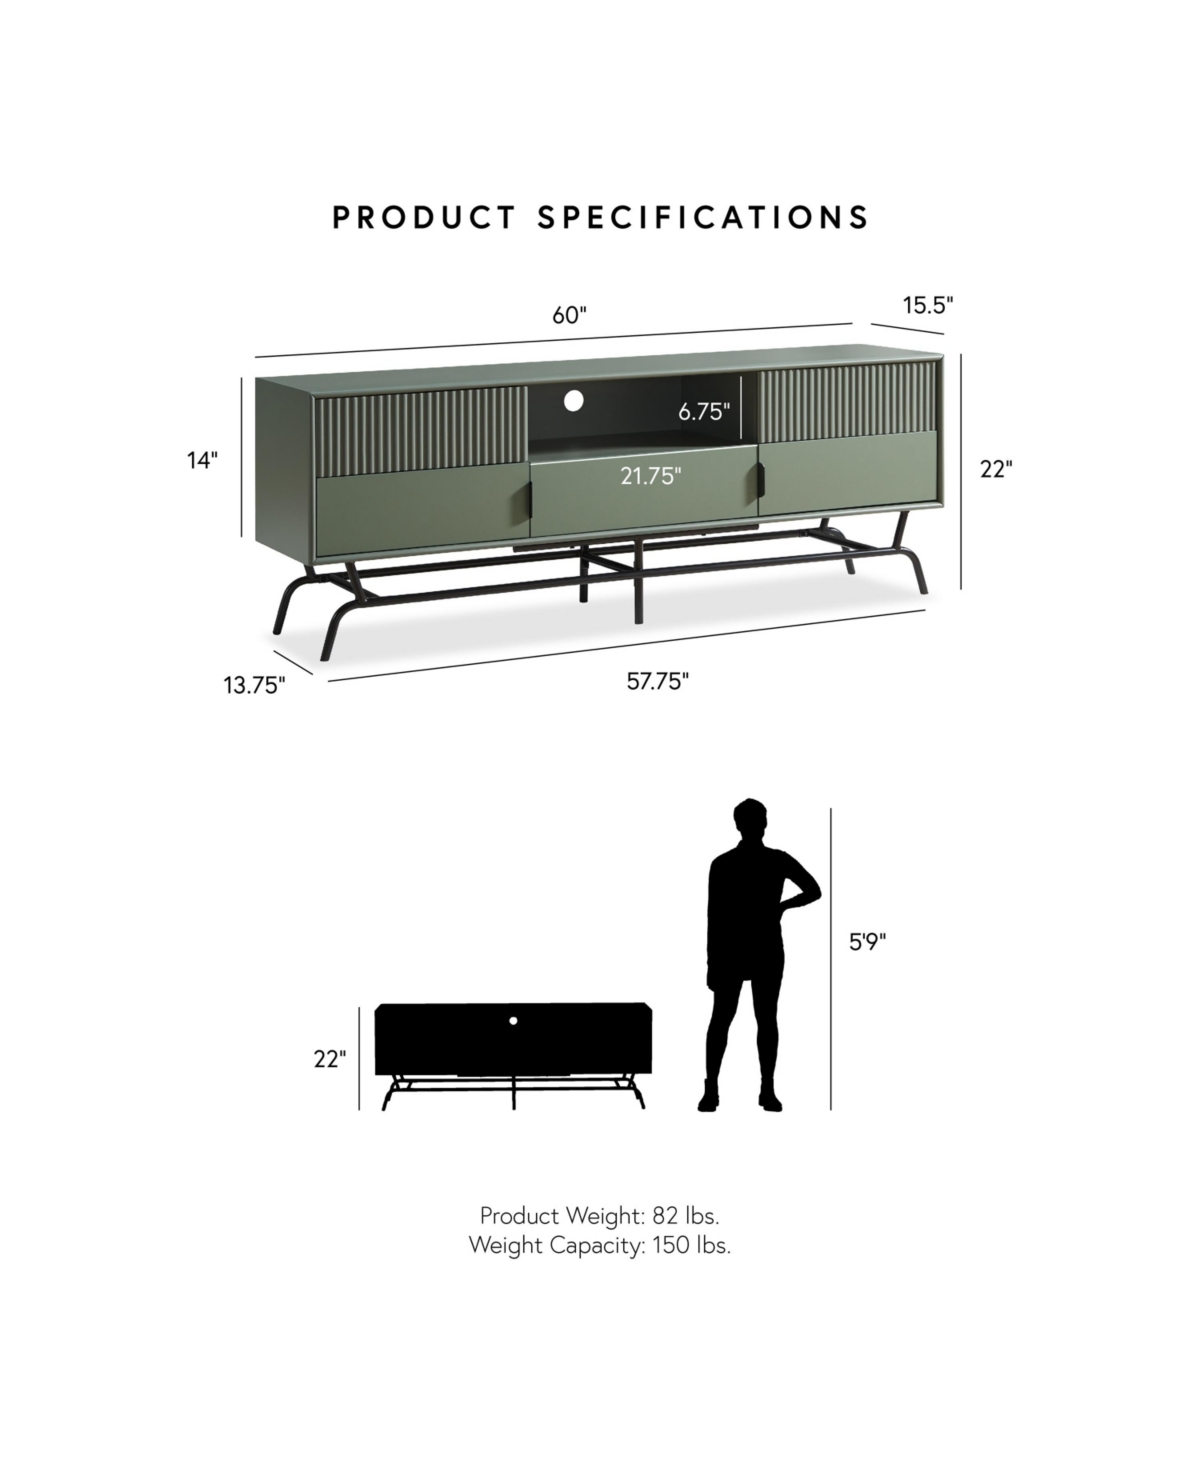 Shop Furniture Of America 60" Mdf Wade Modern Composite Tv Stand In Sage Green